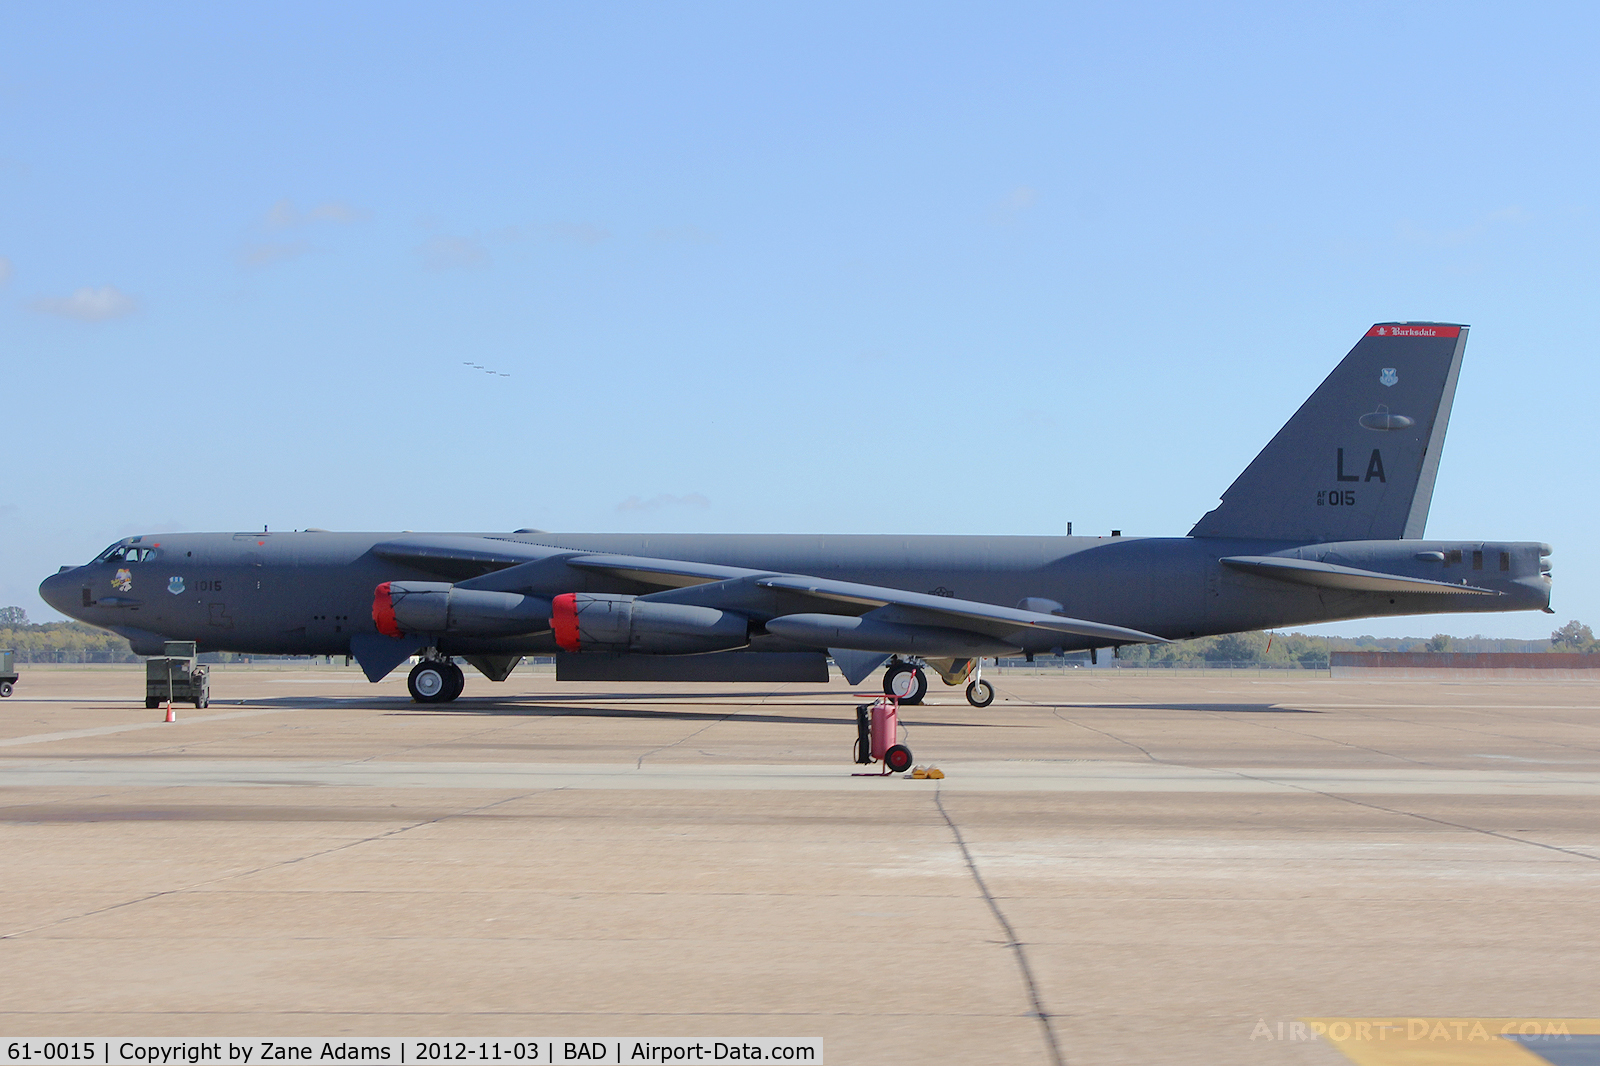 61-0015, 1961 Boeing B-52H Stratofortress C/N 464442, On the ramp at Barksdale AFB